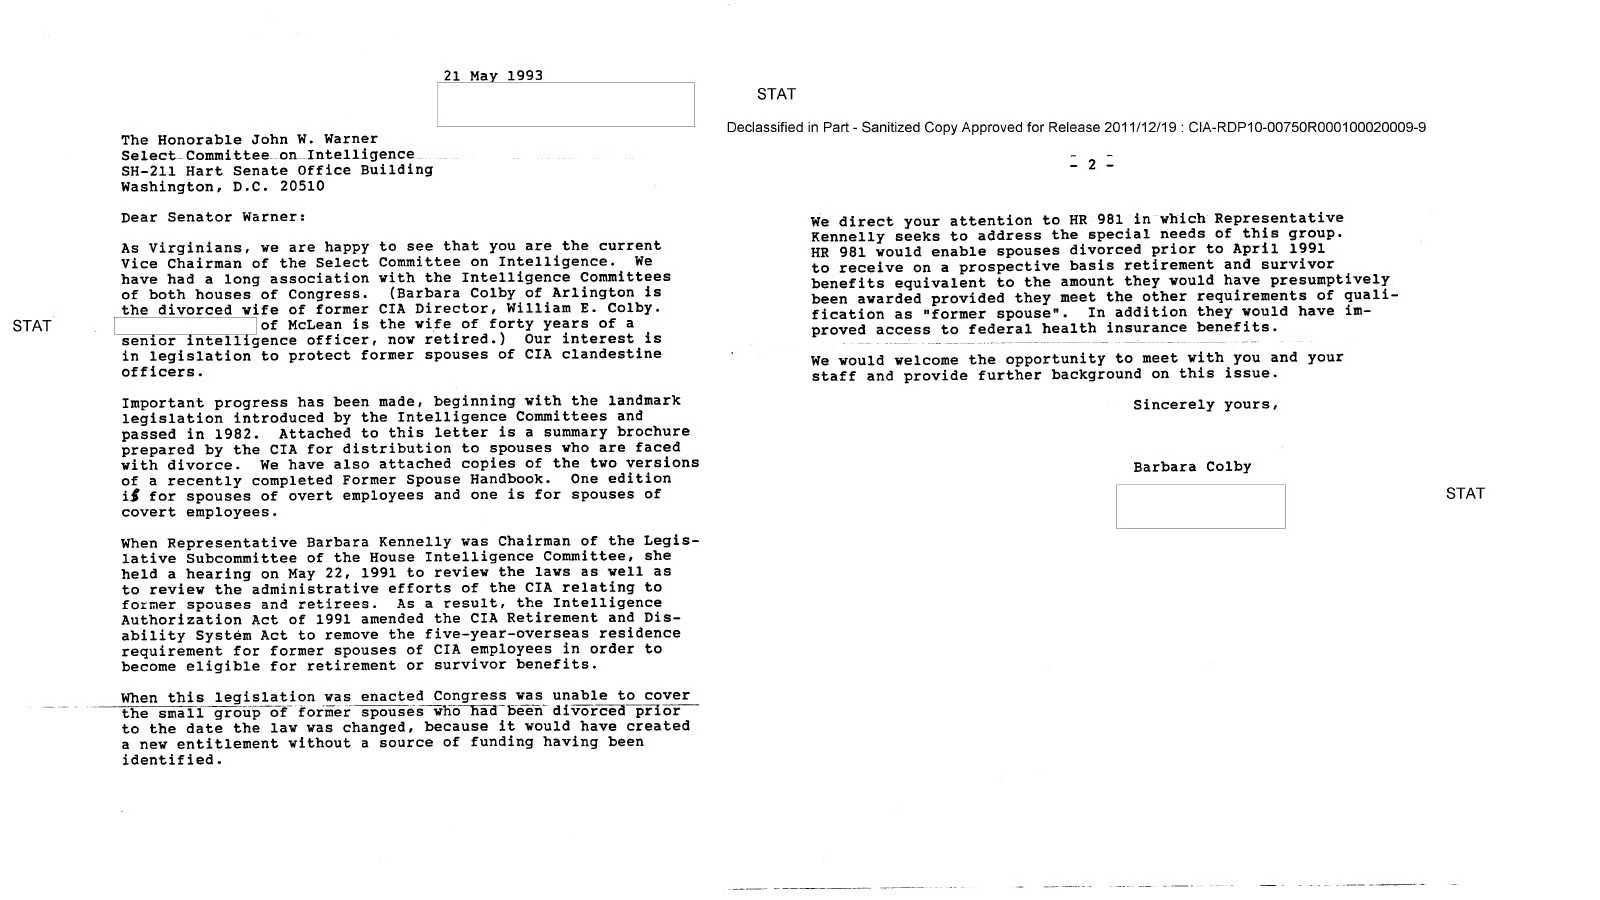 Barbara-Colby-letter-to-CIA-1993